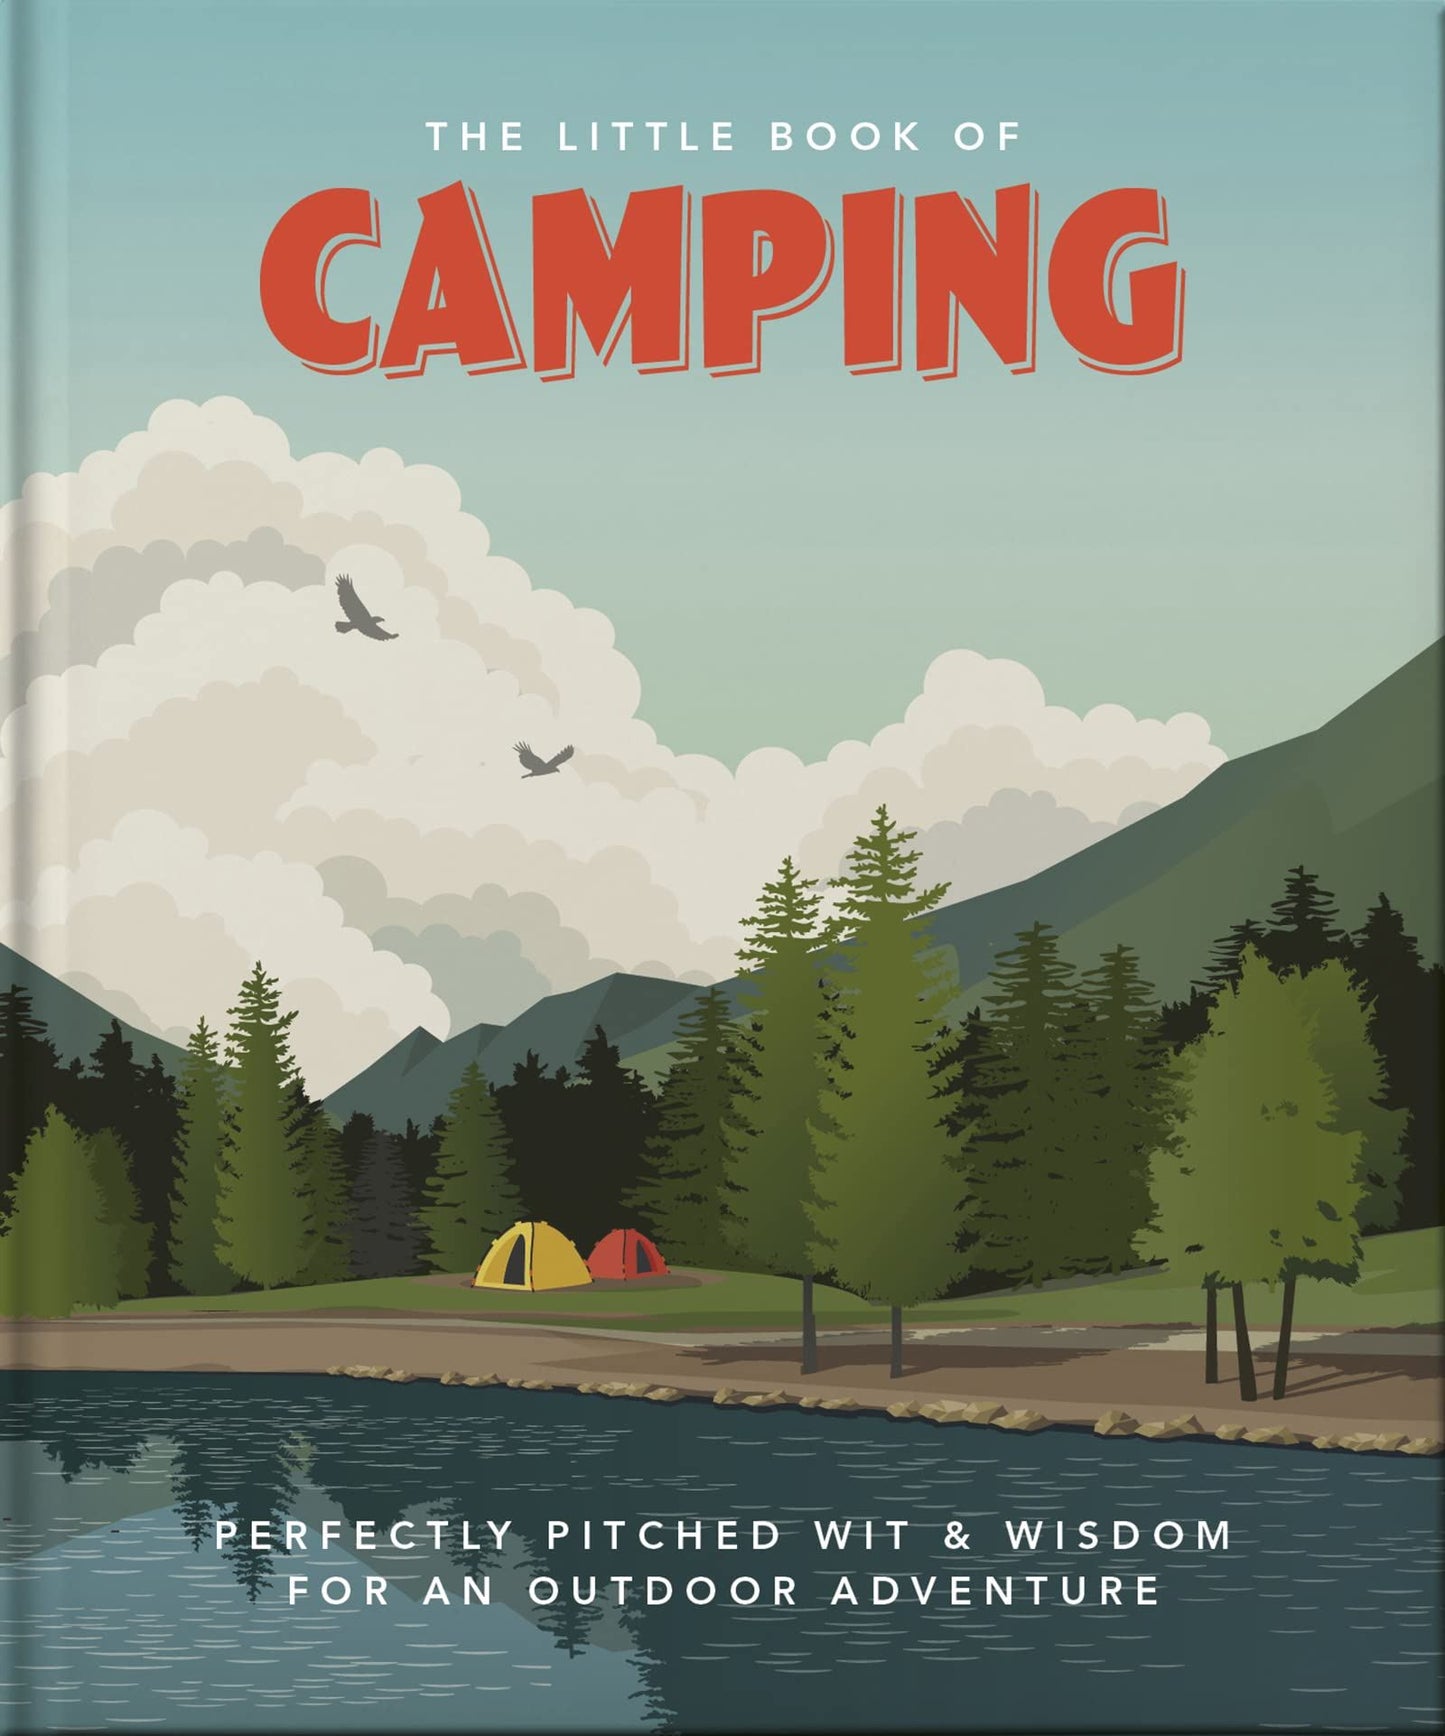 The Little Book of Camping